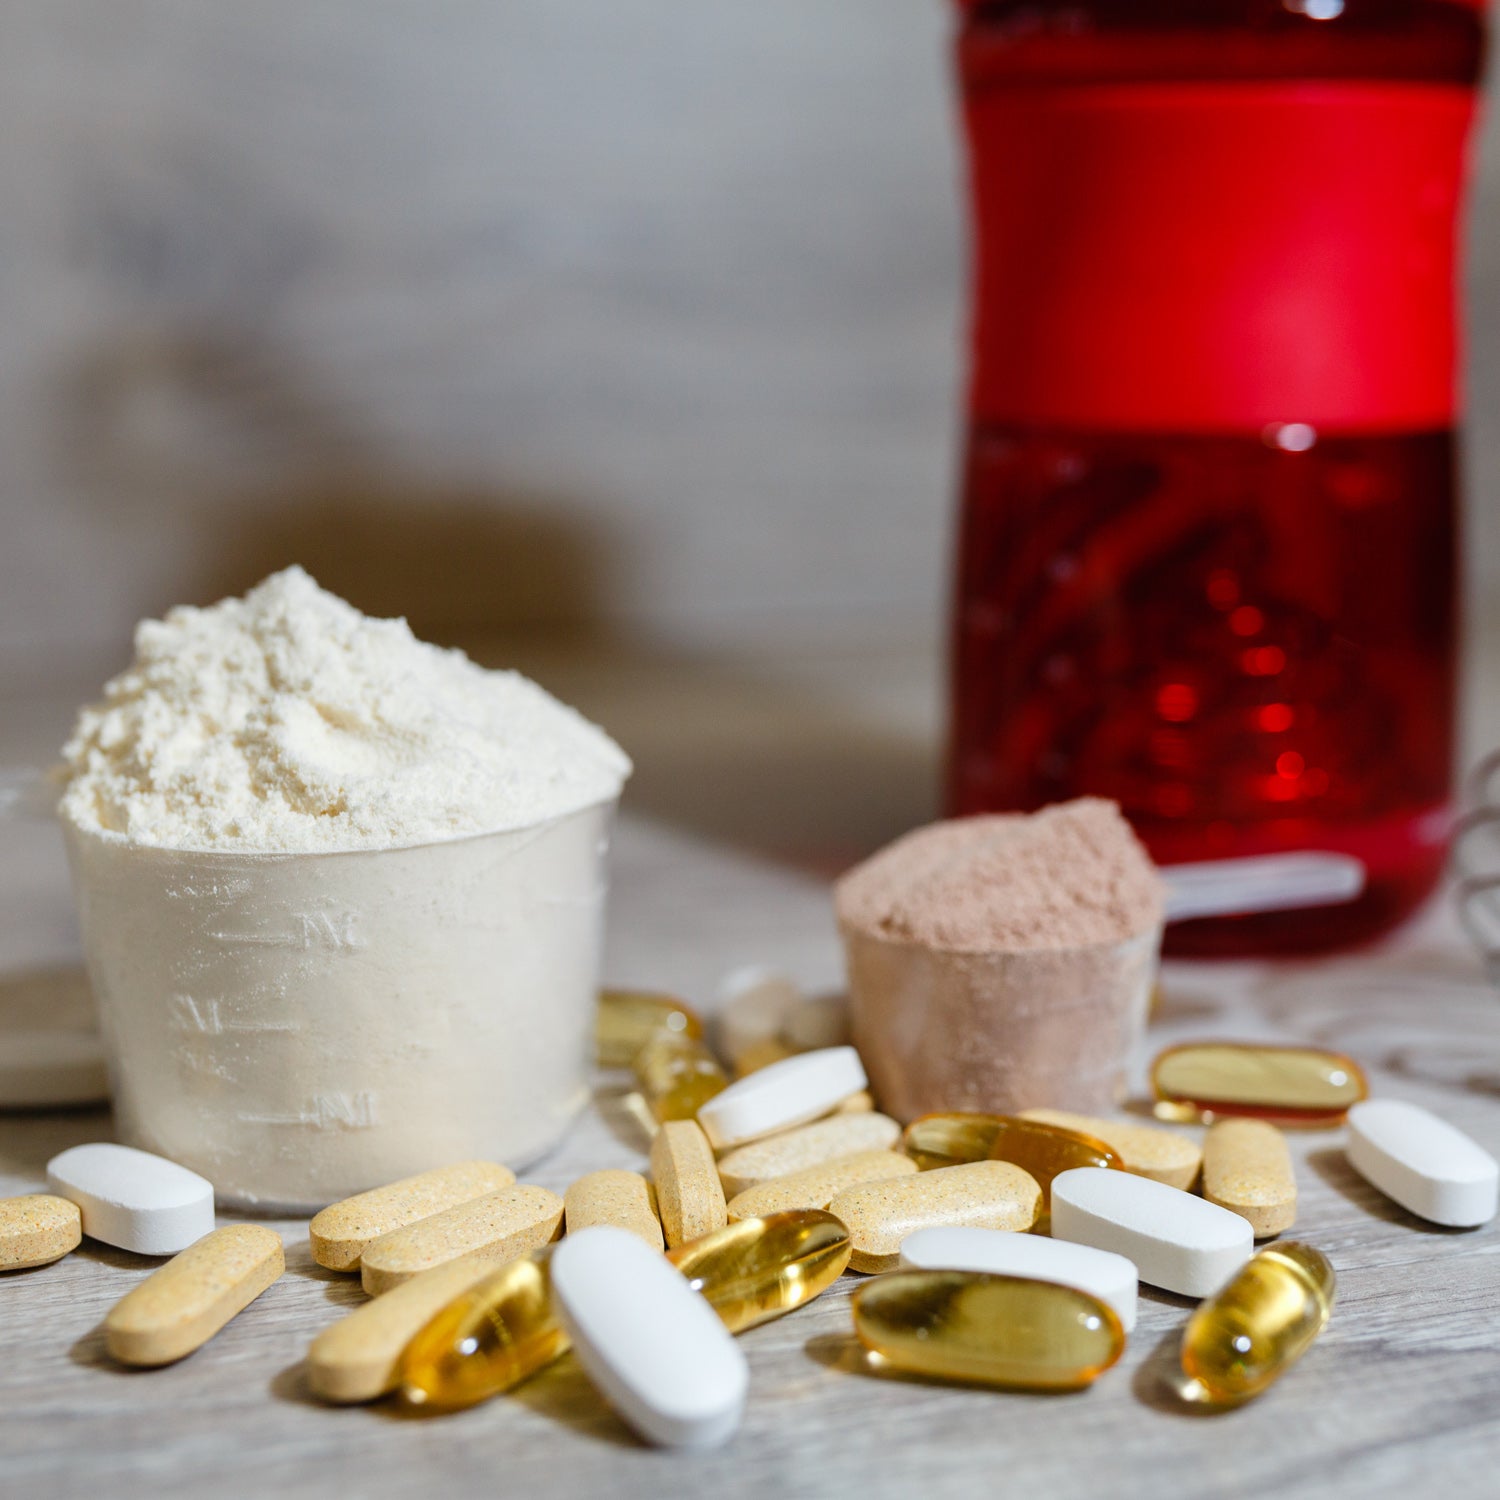 Top 6 Pre-Workout Supplements To Enhance Performance